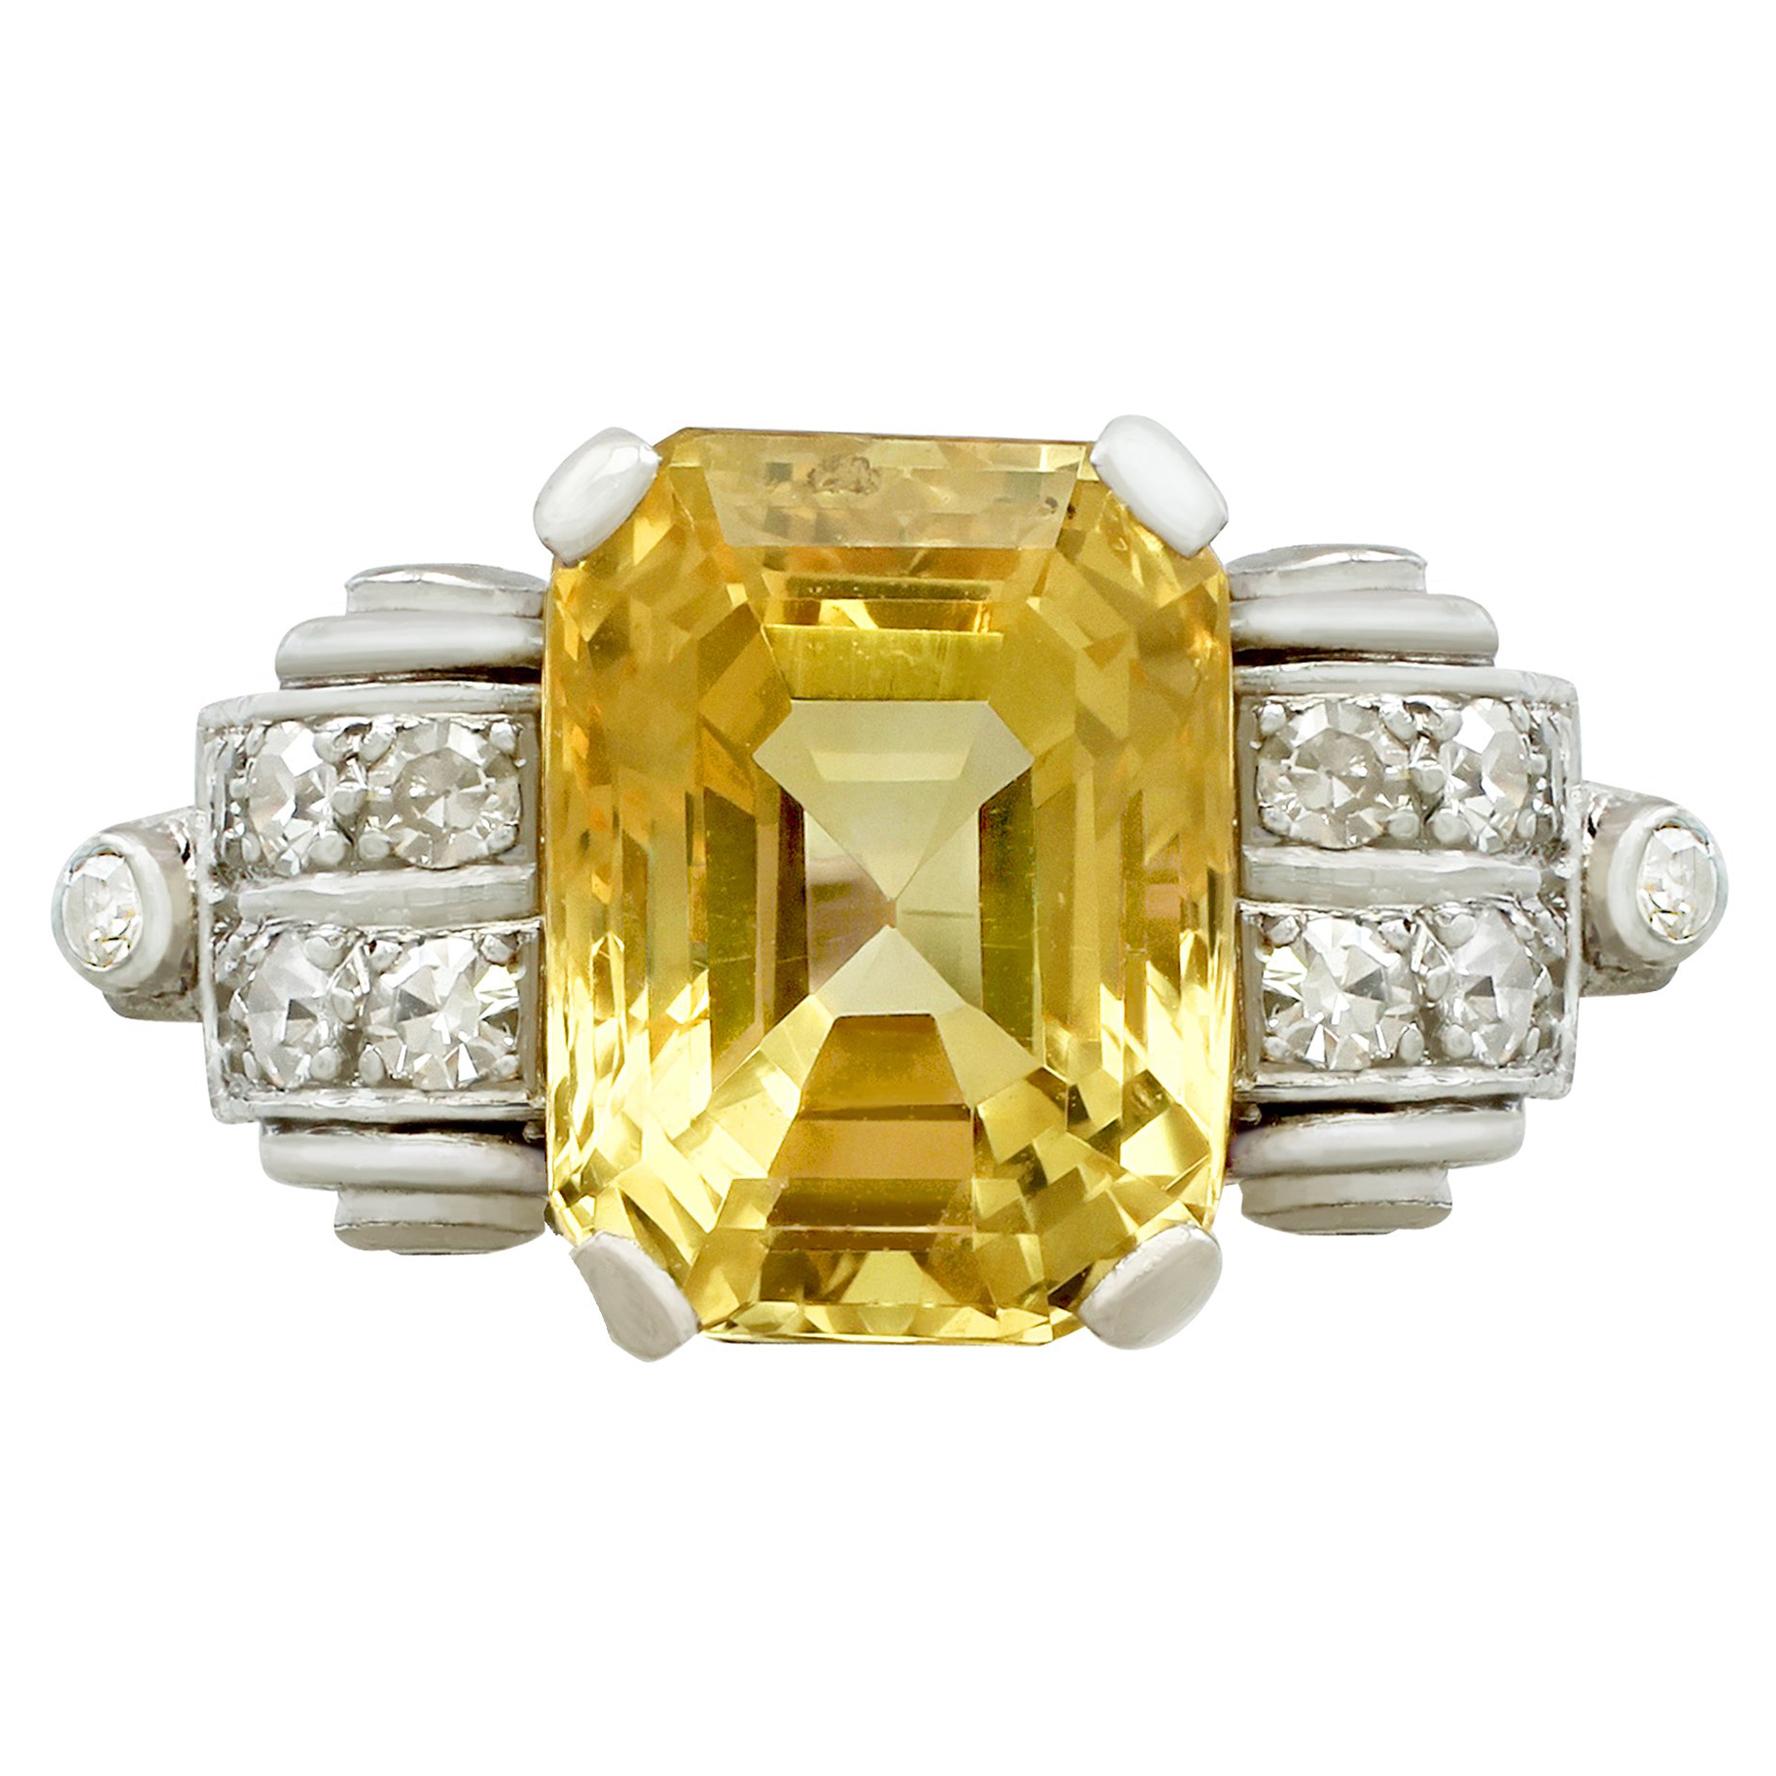 A stunning antique 5.52 carat yellow sapphire and 0.50 carat diamond, platinum dress ring; part of our diverse antique jewellery and estate jewelry collections.

This stunning, fine and impressive antique yellow sapphire and diamond ring has been